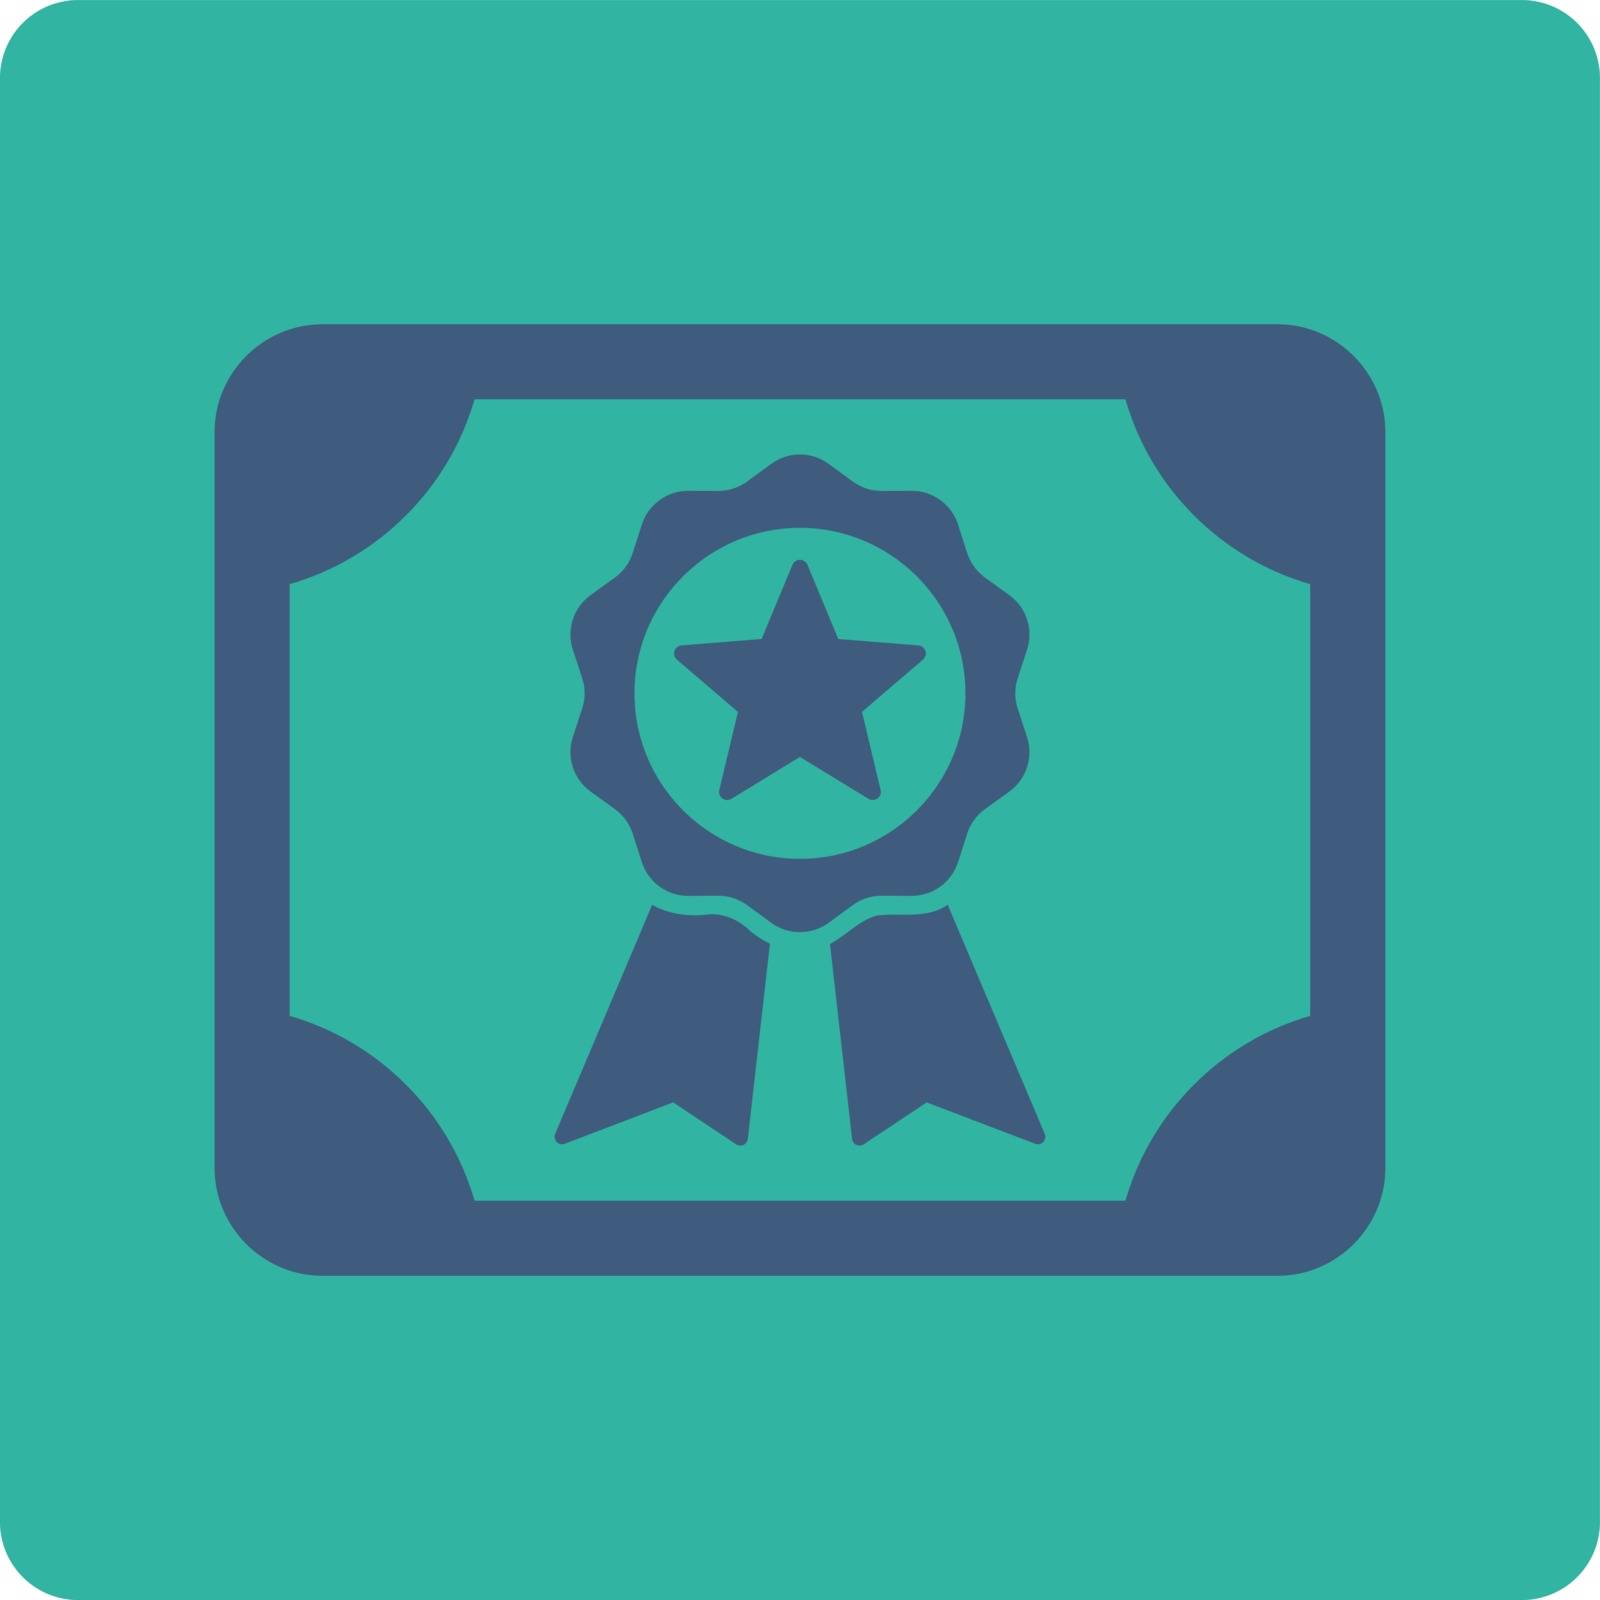 Certificate icon. Vector style is cobalt and cyan colors, flat rounded square button on a white background.